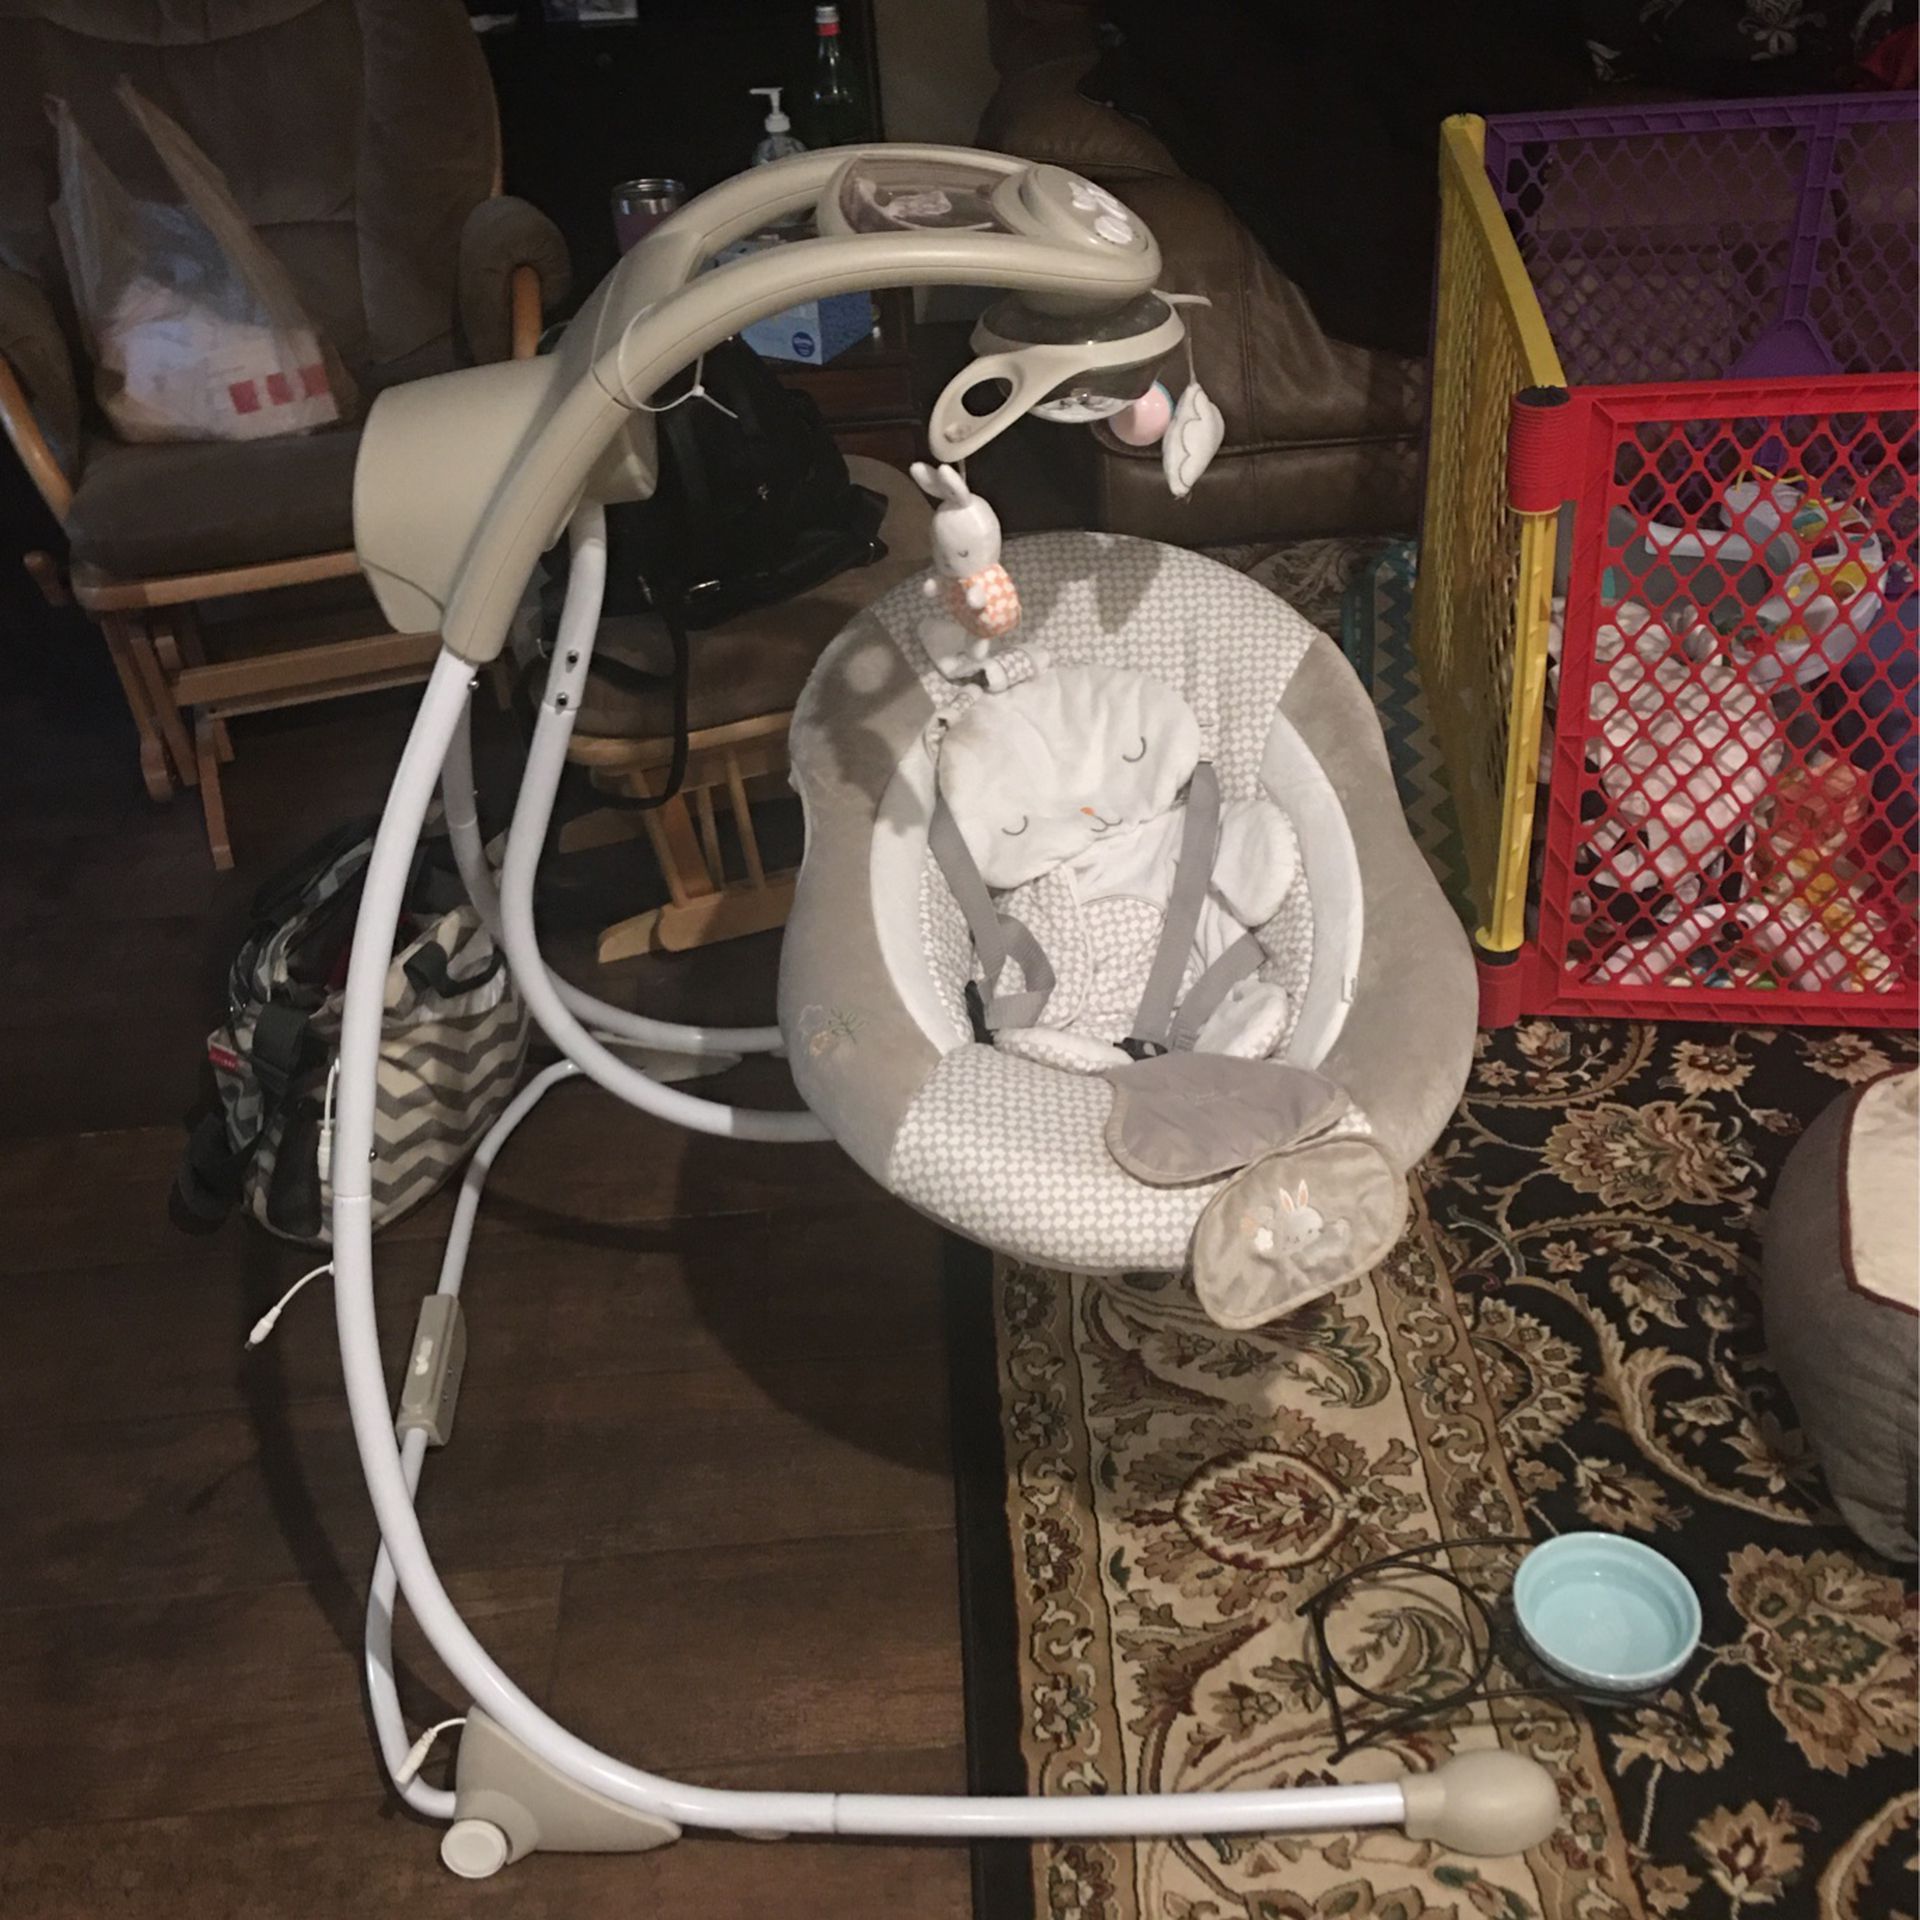 Infant Swing With Lights And Music. Phone Hardwire Connection